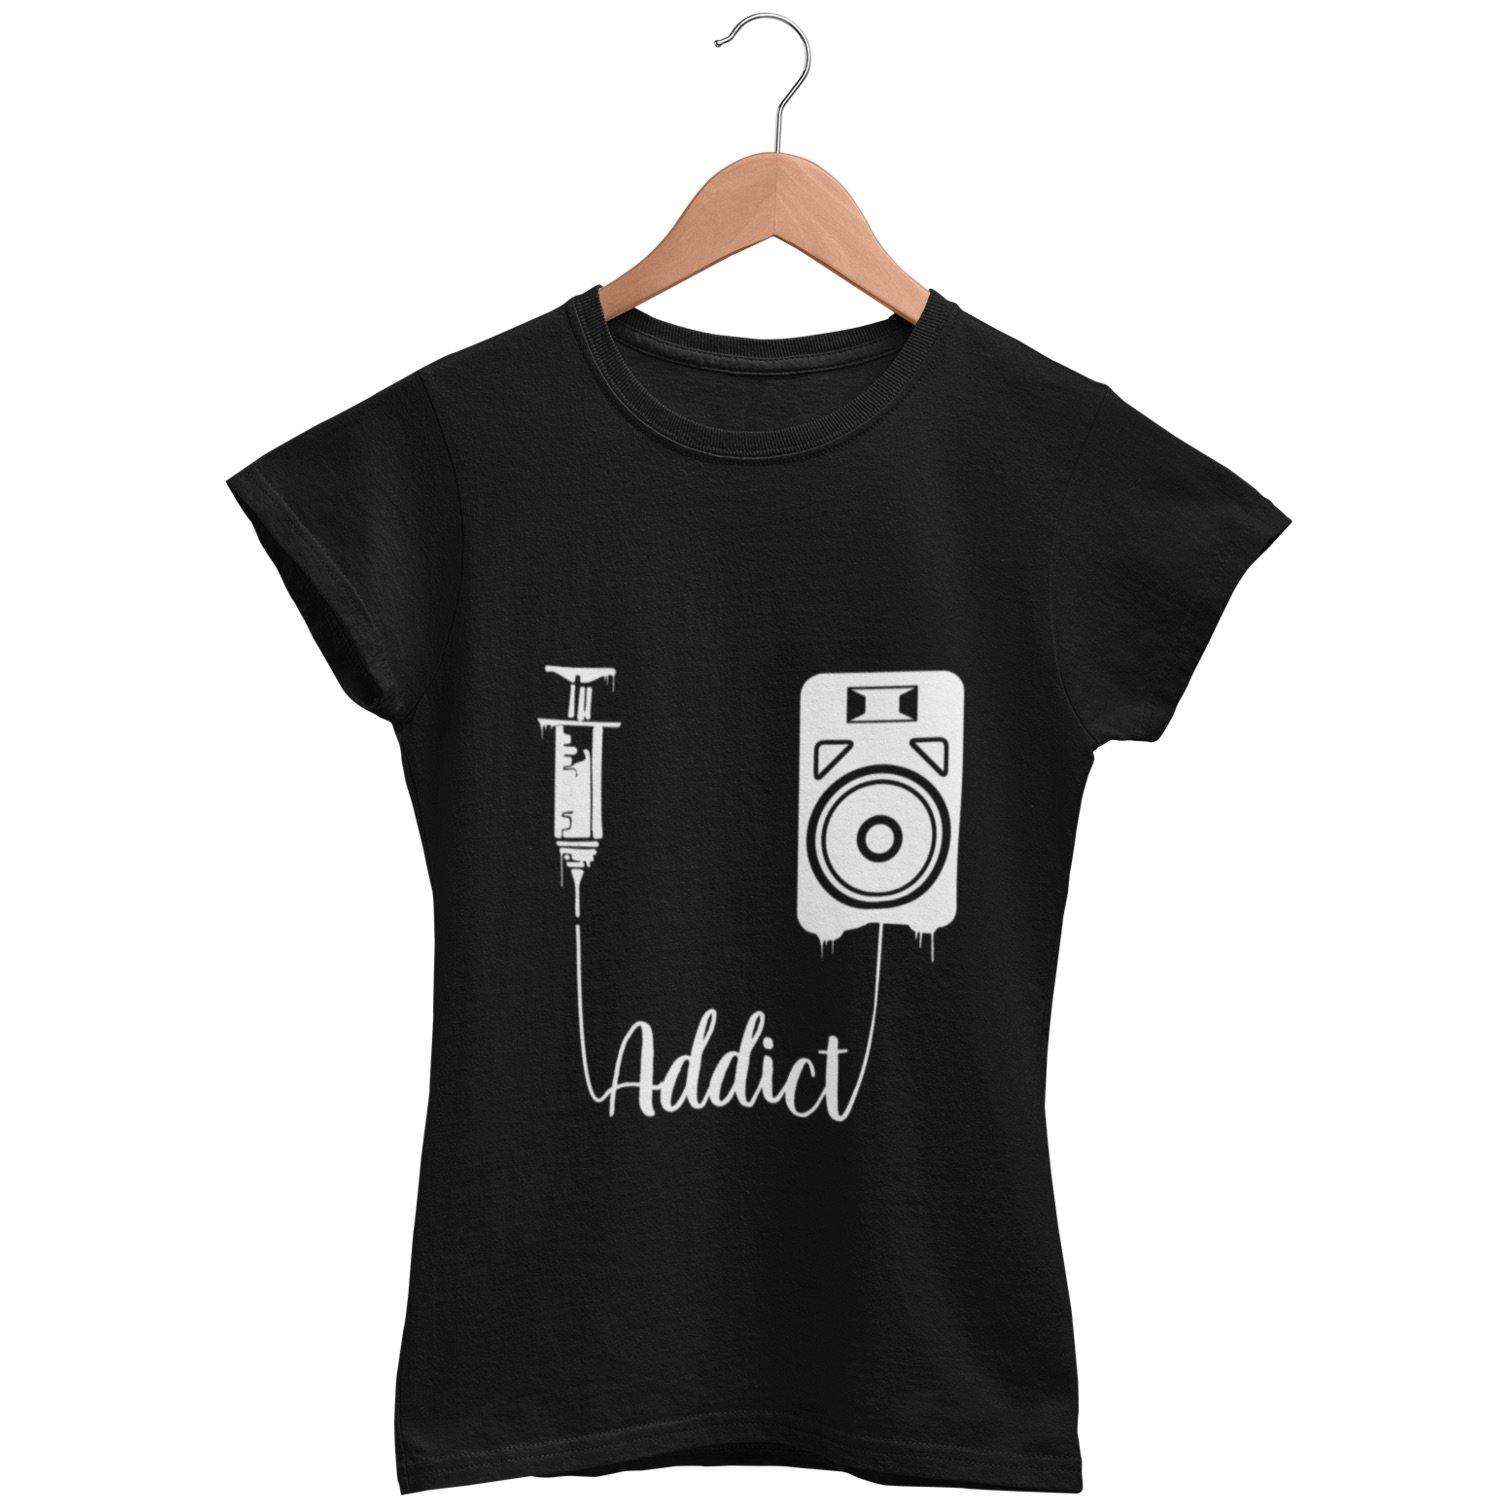 Techno Visual Effect 2 Women\'s Fitted T-Shirt | Techno Outfit